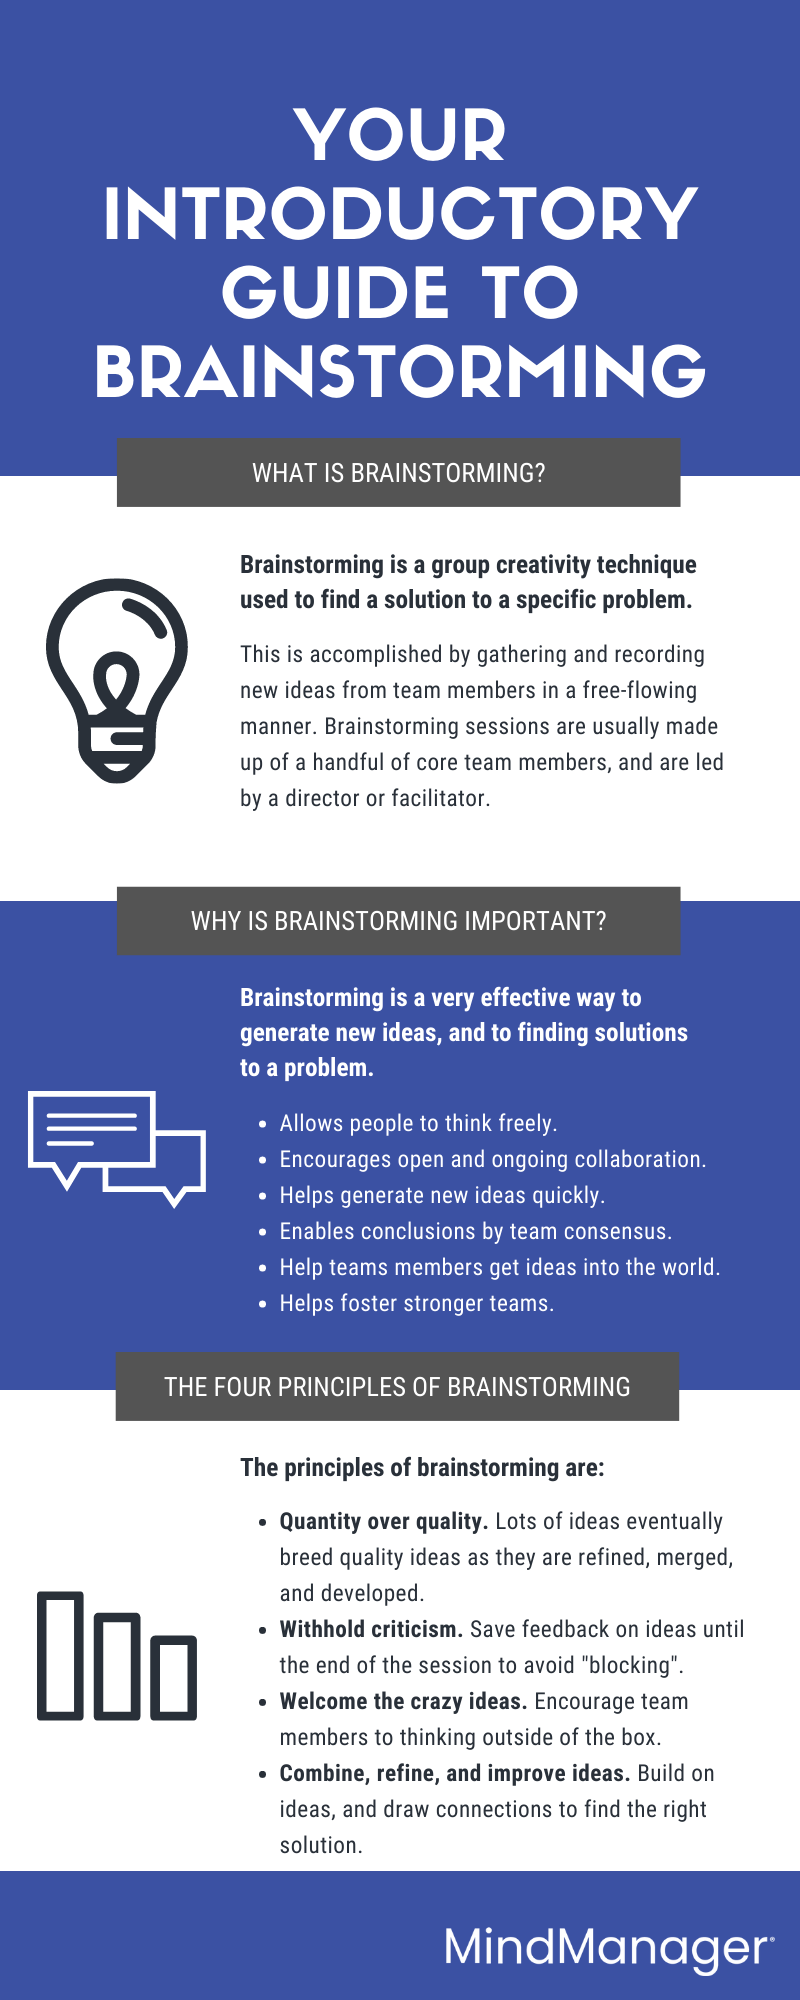 What is brainstorming and why is it important? | MindManager Blog